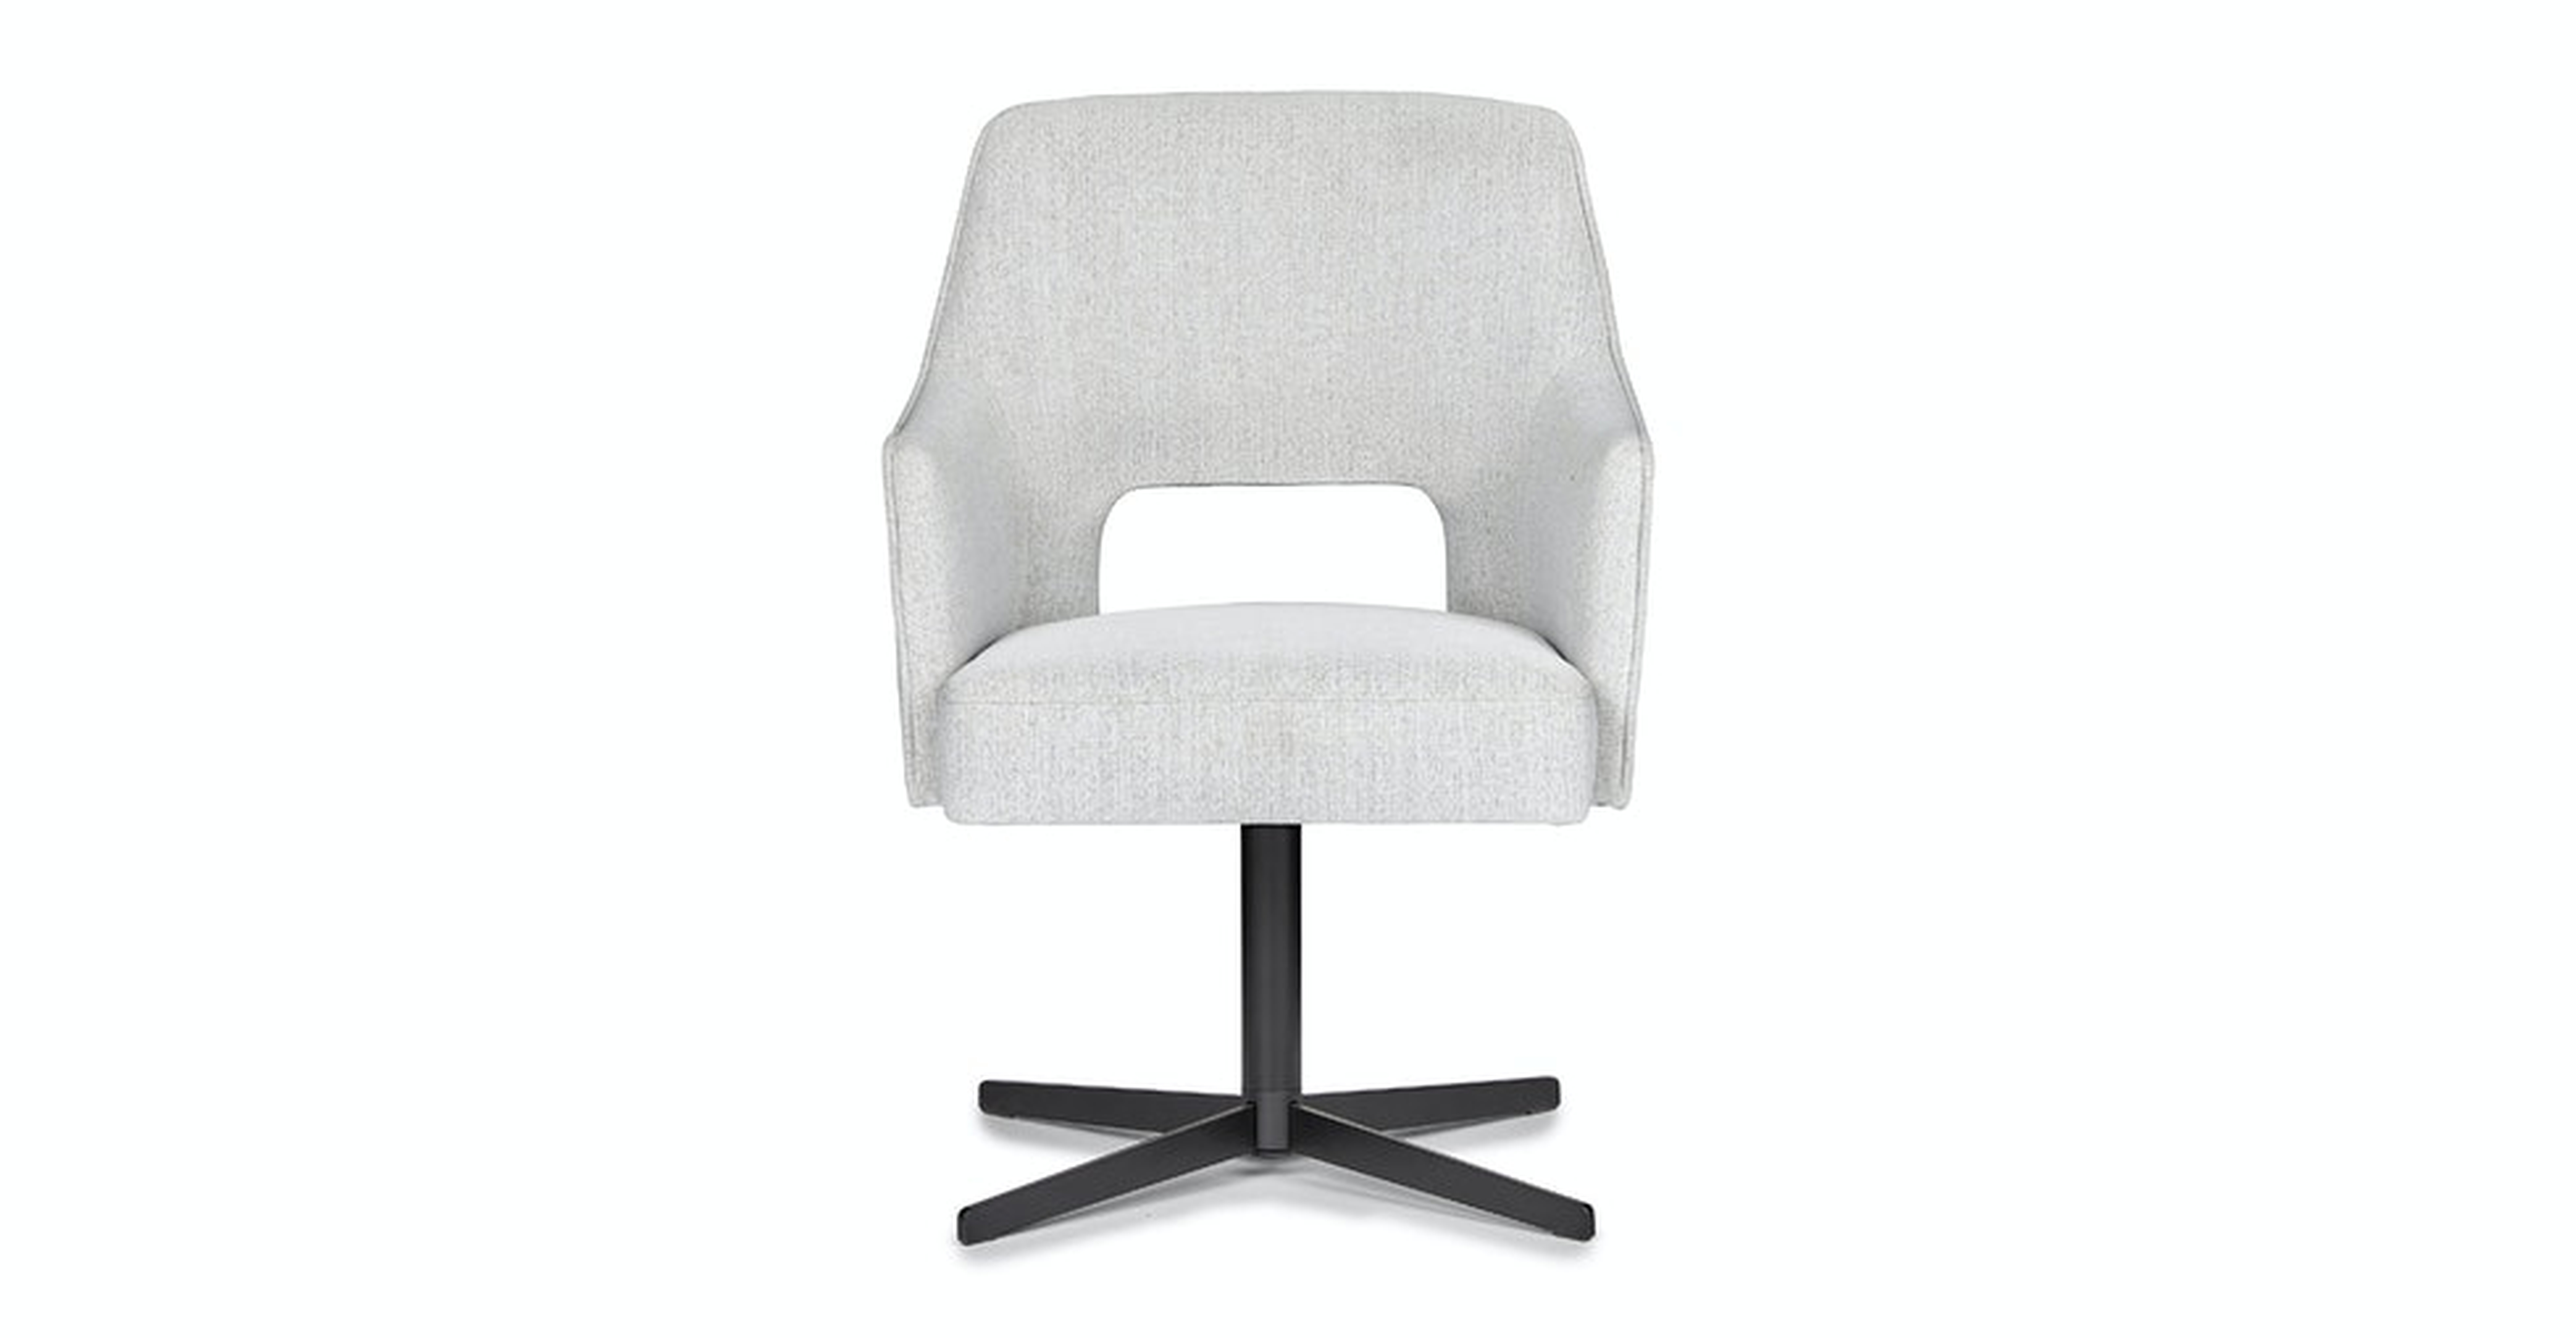 Eliseno Drizzle Gray Office Chair - Article